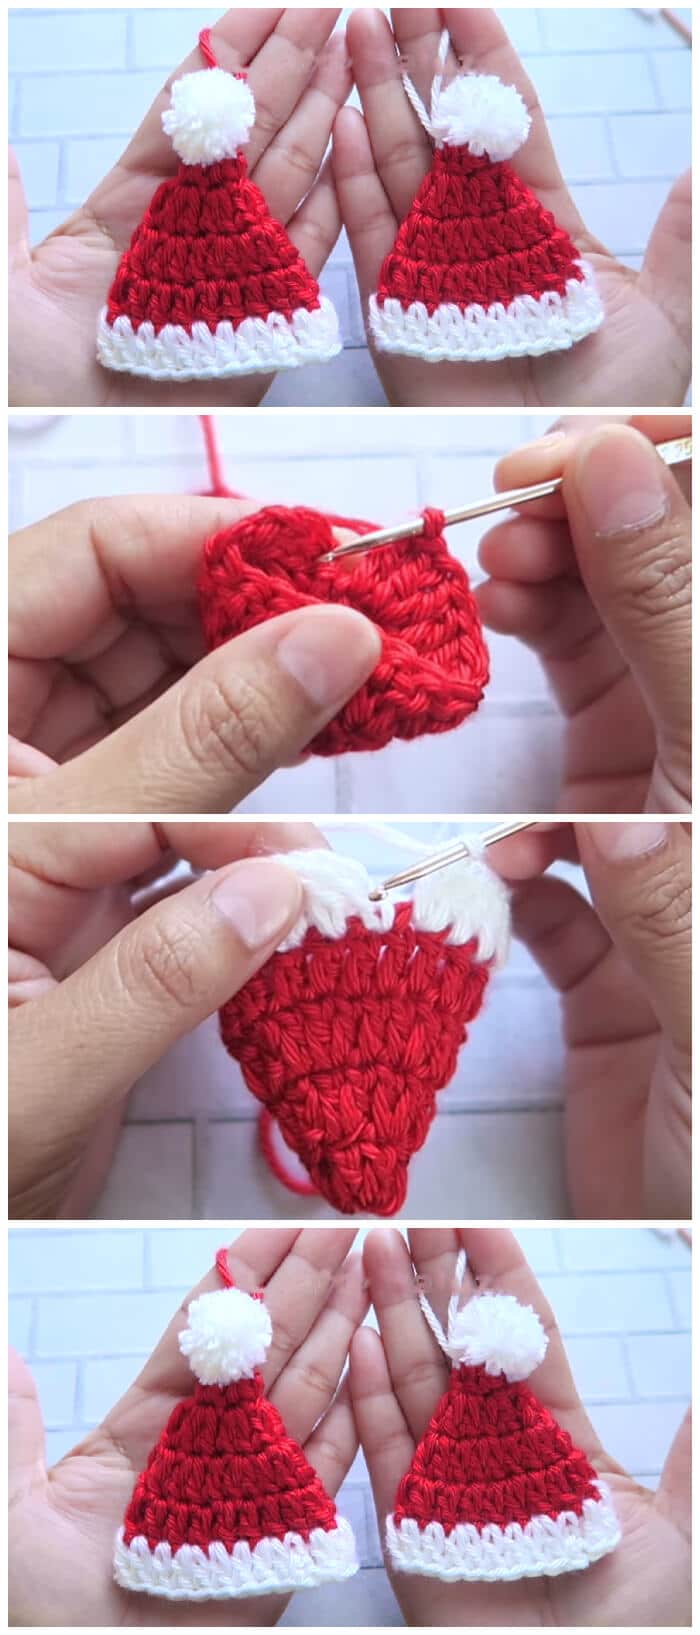 I know everyone is busy this time of year but I wanted to share this Crochet Santa Hat. I found myself with some time and decided a luxurious hand-crafted Santa Hat would be perfect for next project. Enjoy !